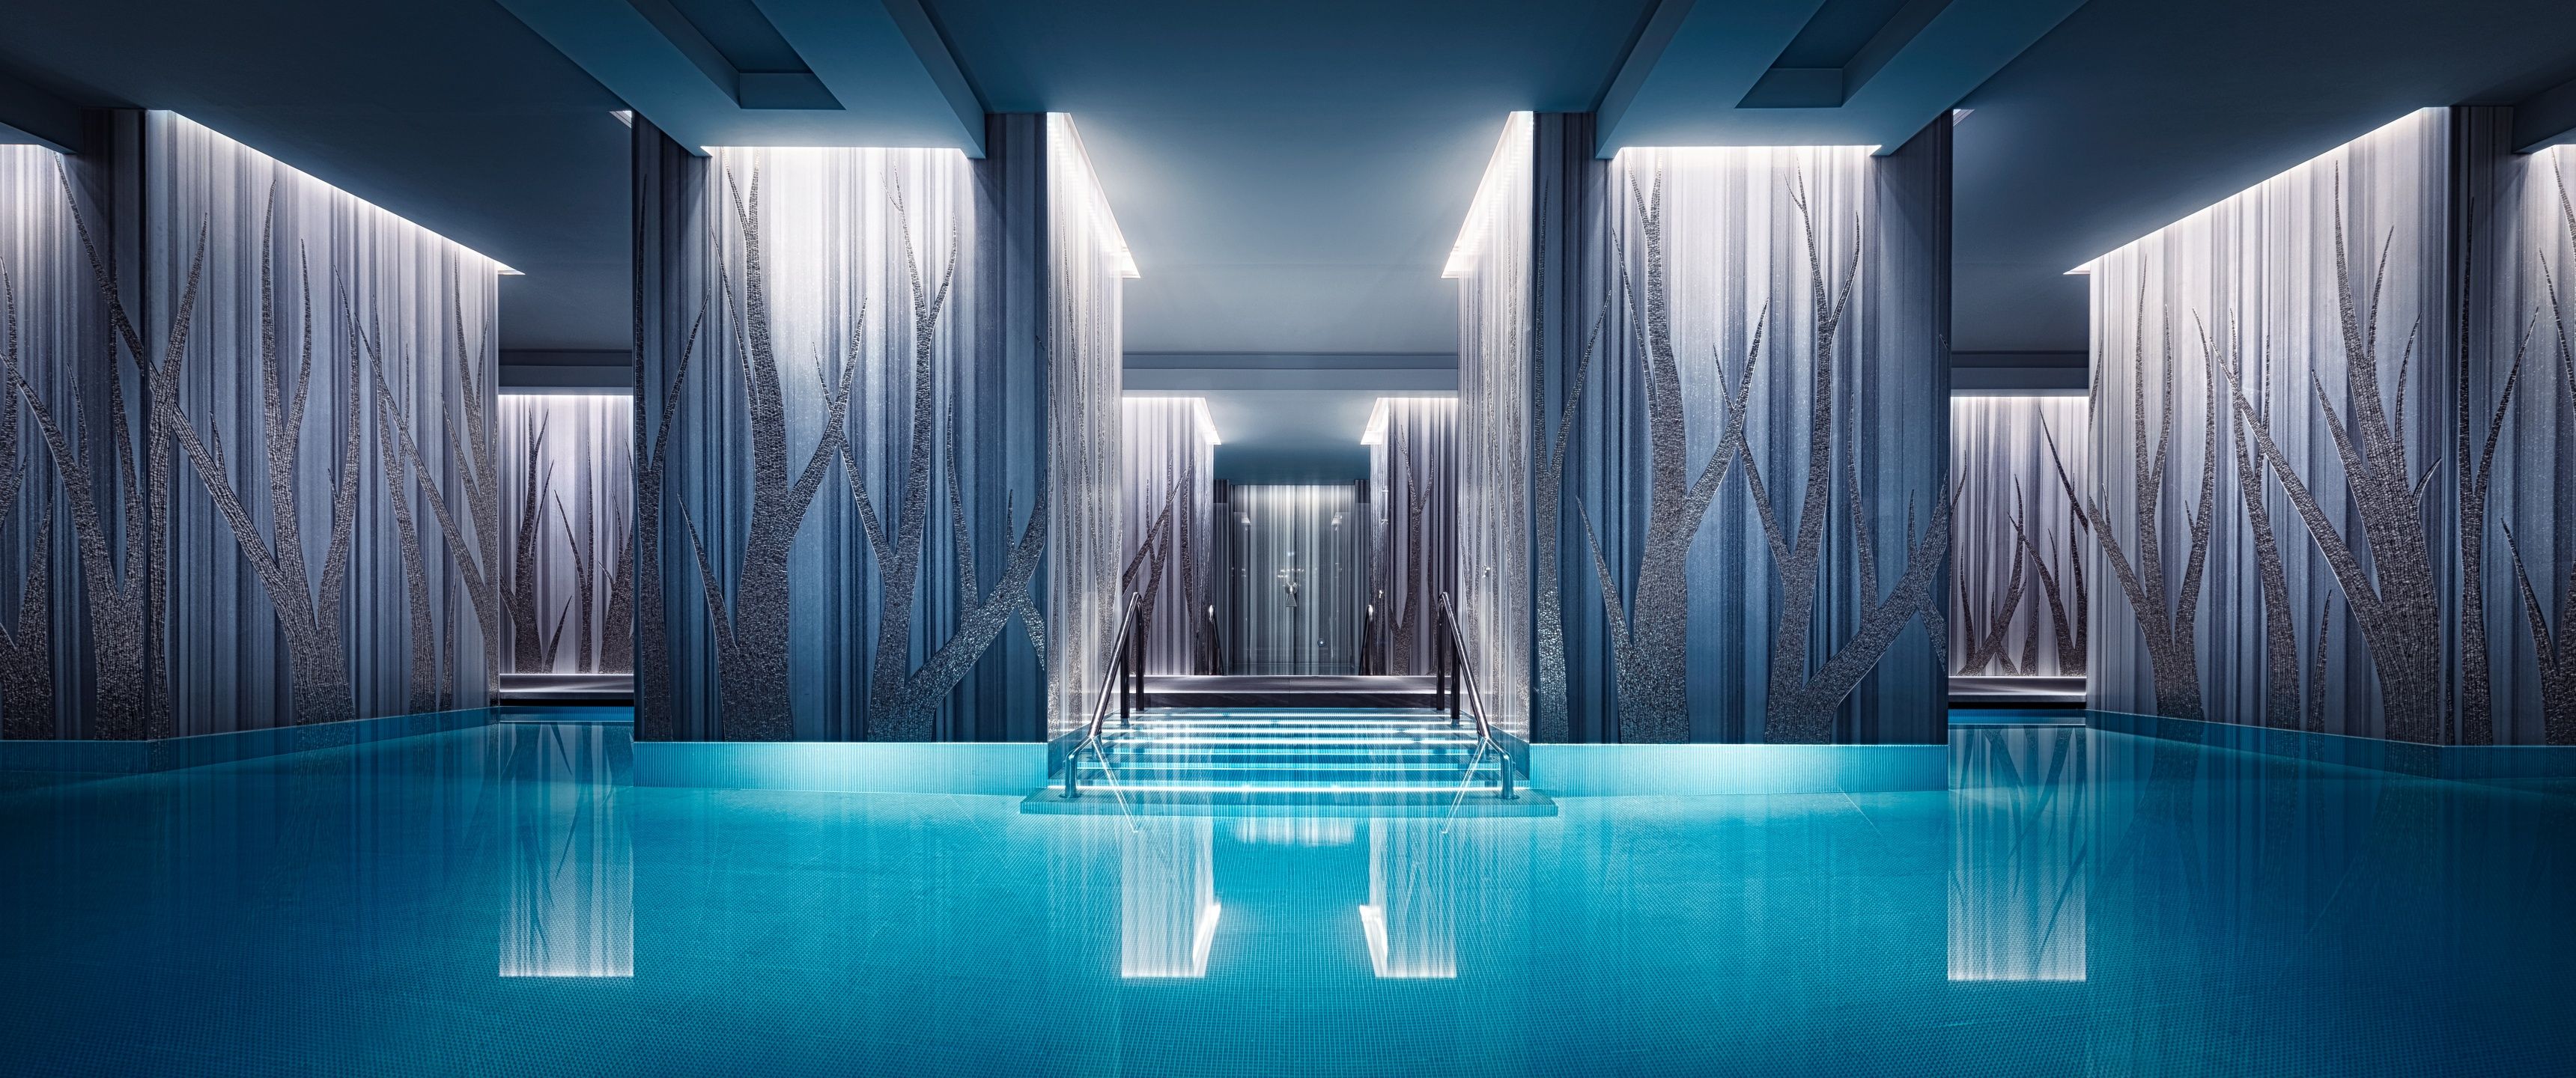 A long, narrow indoor swimming pool with waterfalls on the walls - Swimming pool